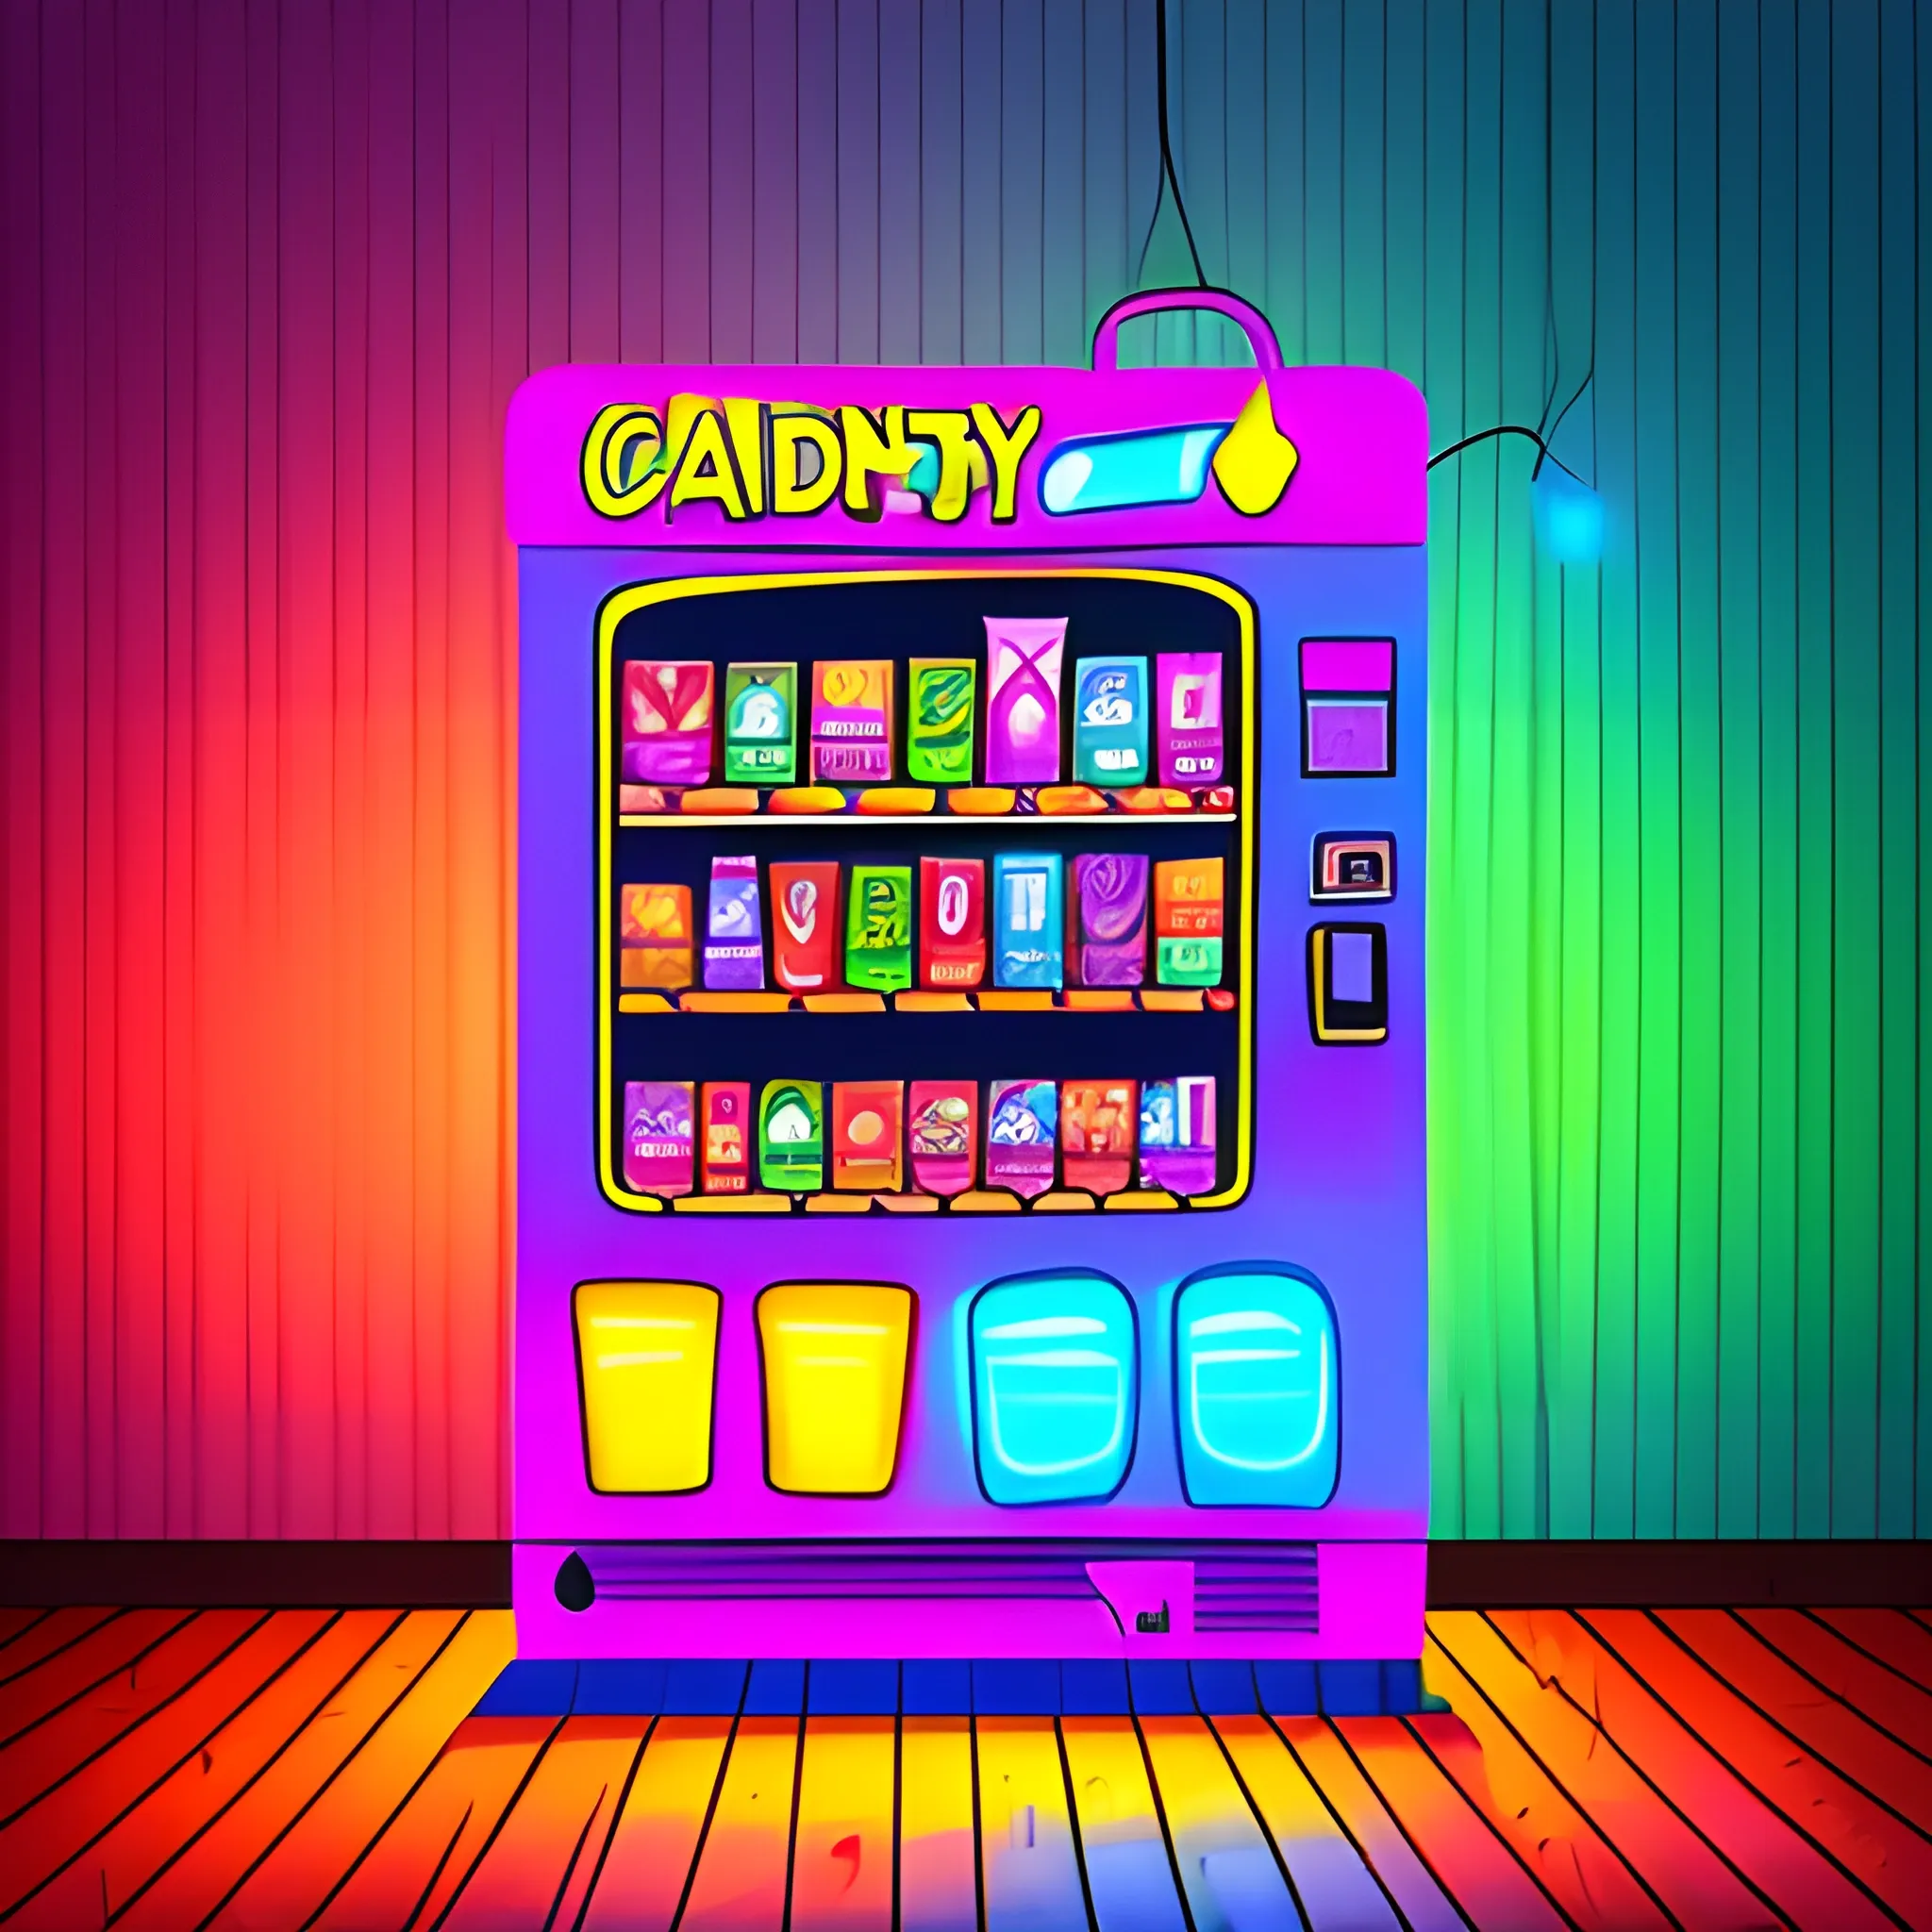 vending machine with candy, drinks, toys in a digital drawing style with neon lights, camera at an angle, wooden wall background and a window on the side.